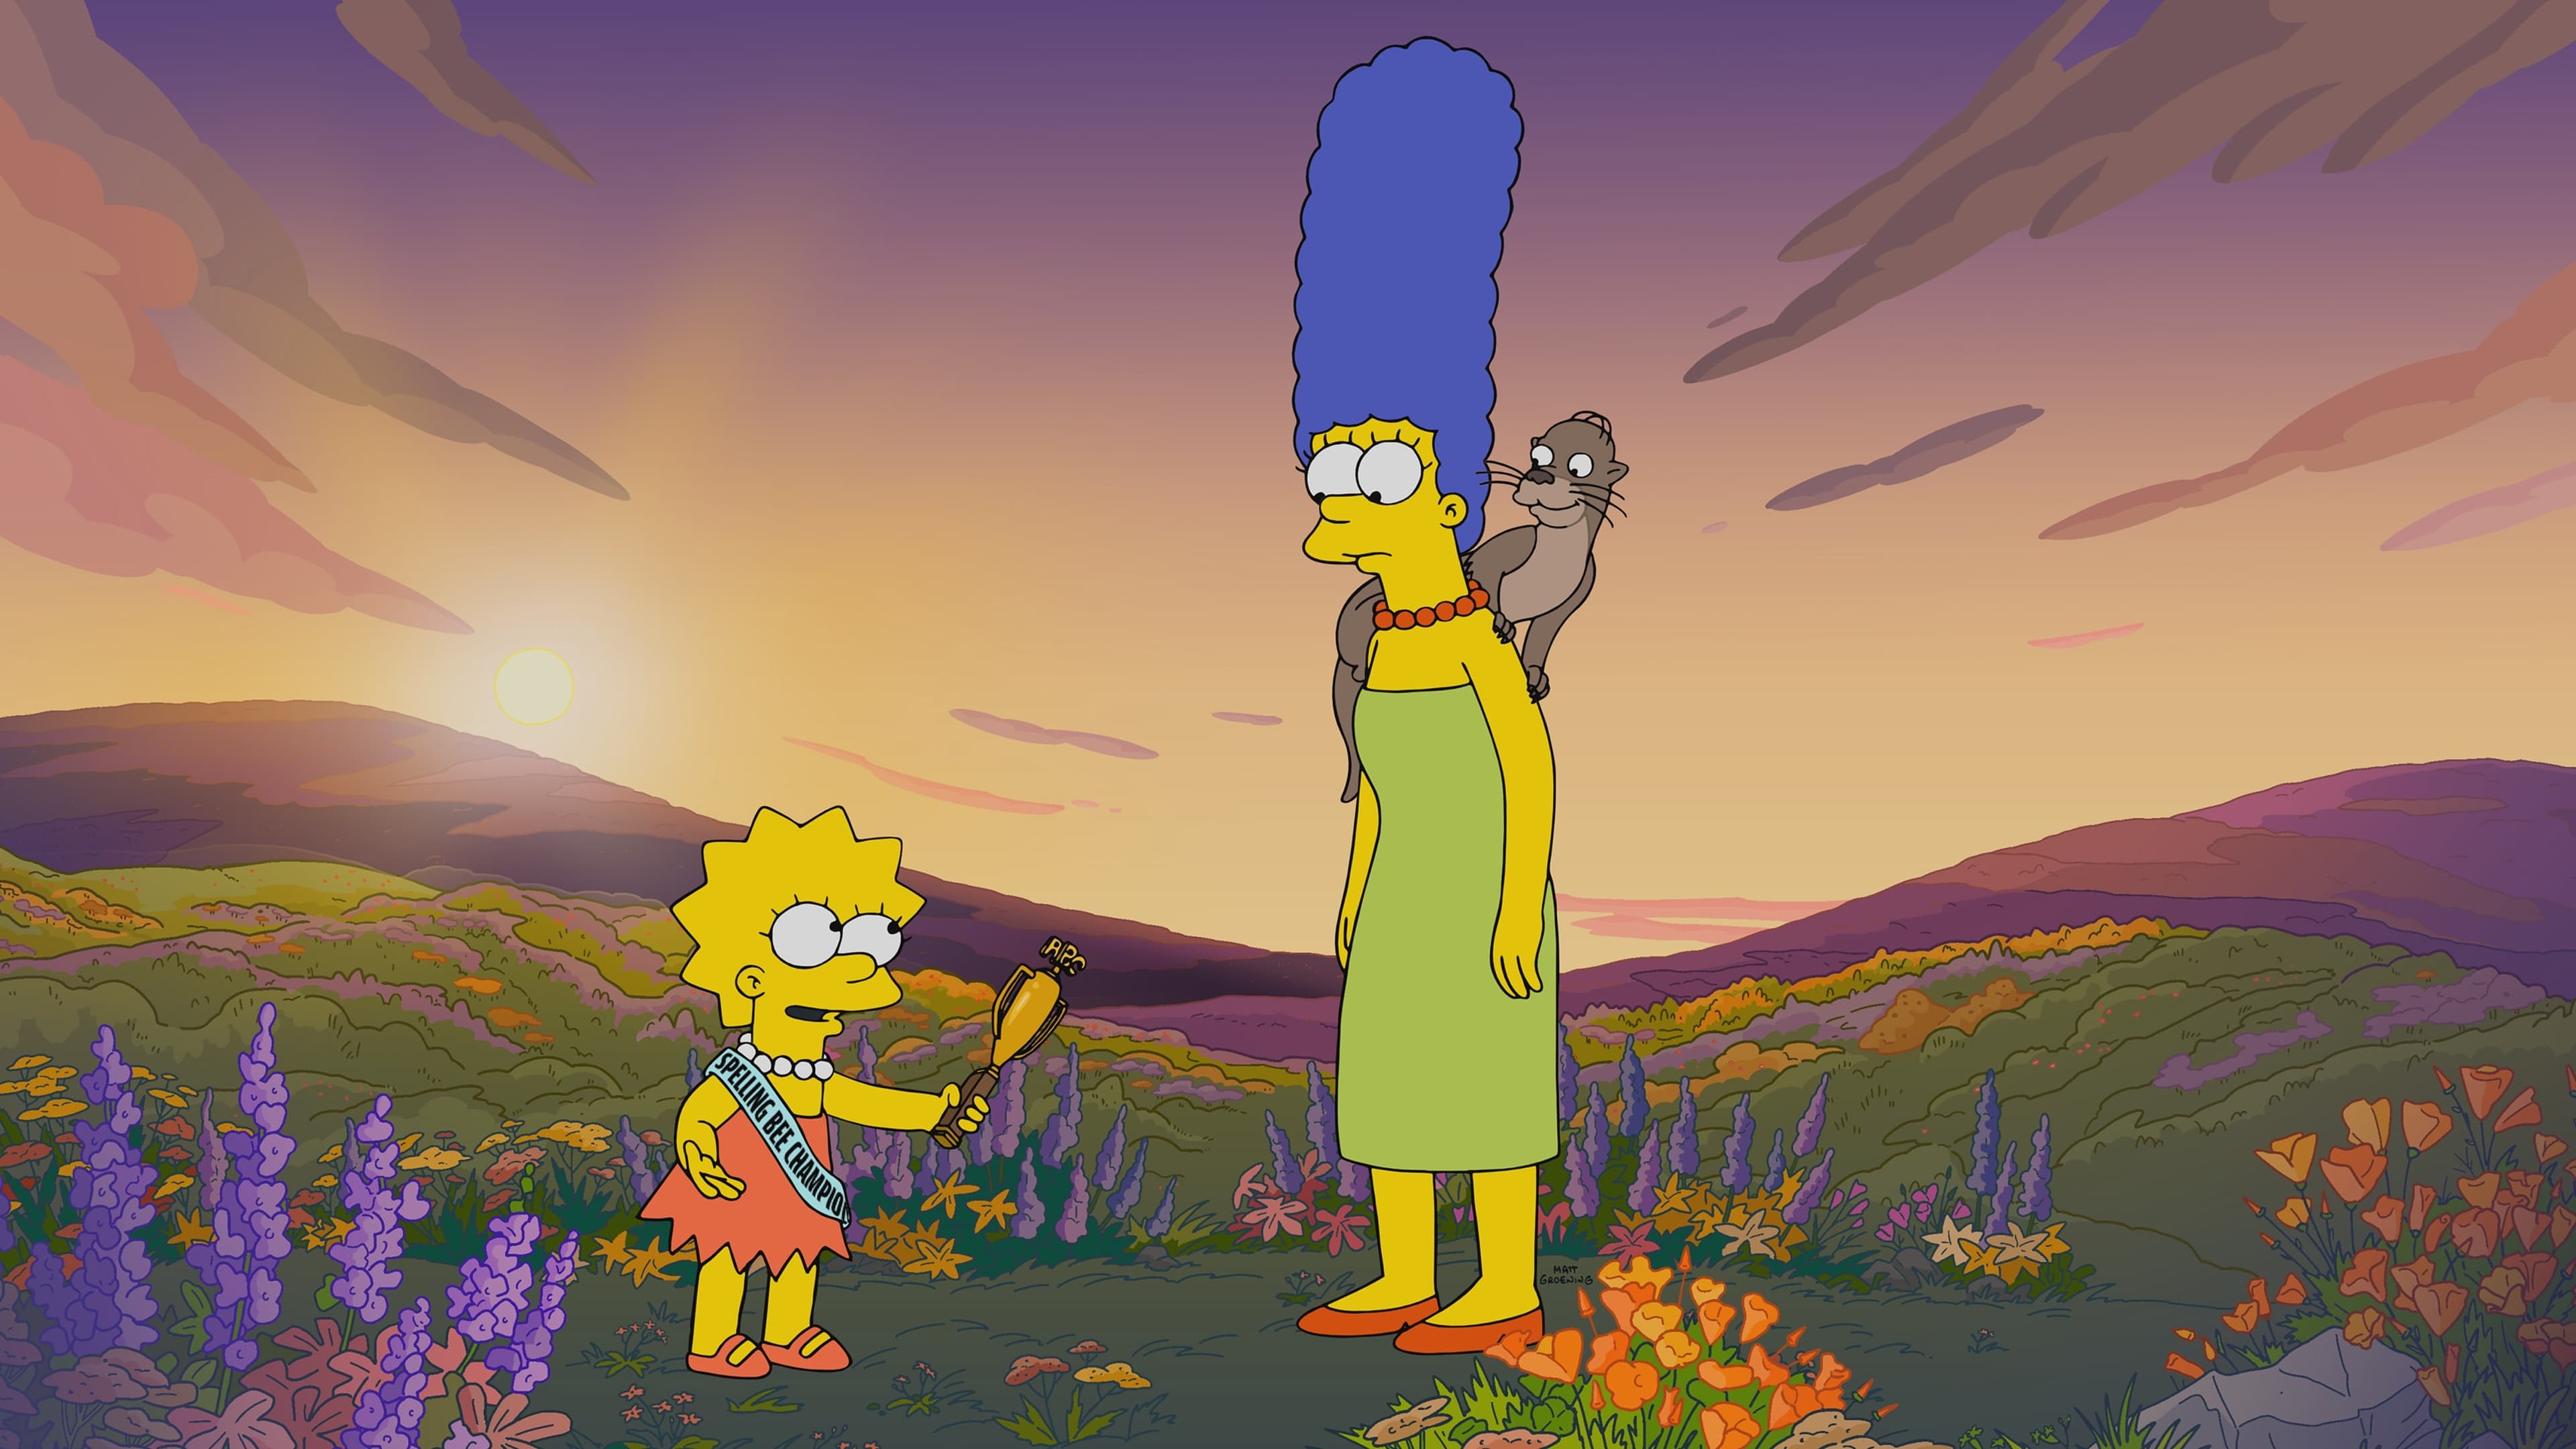 The Simpsons Season 35 :Episode 2  A Mid-Childhood Night's Dream